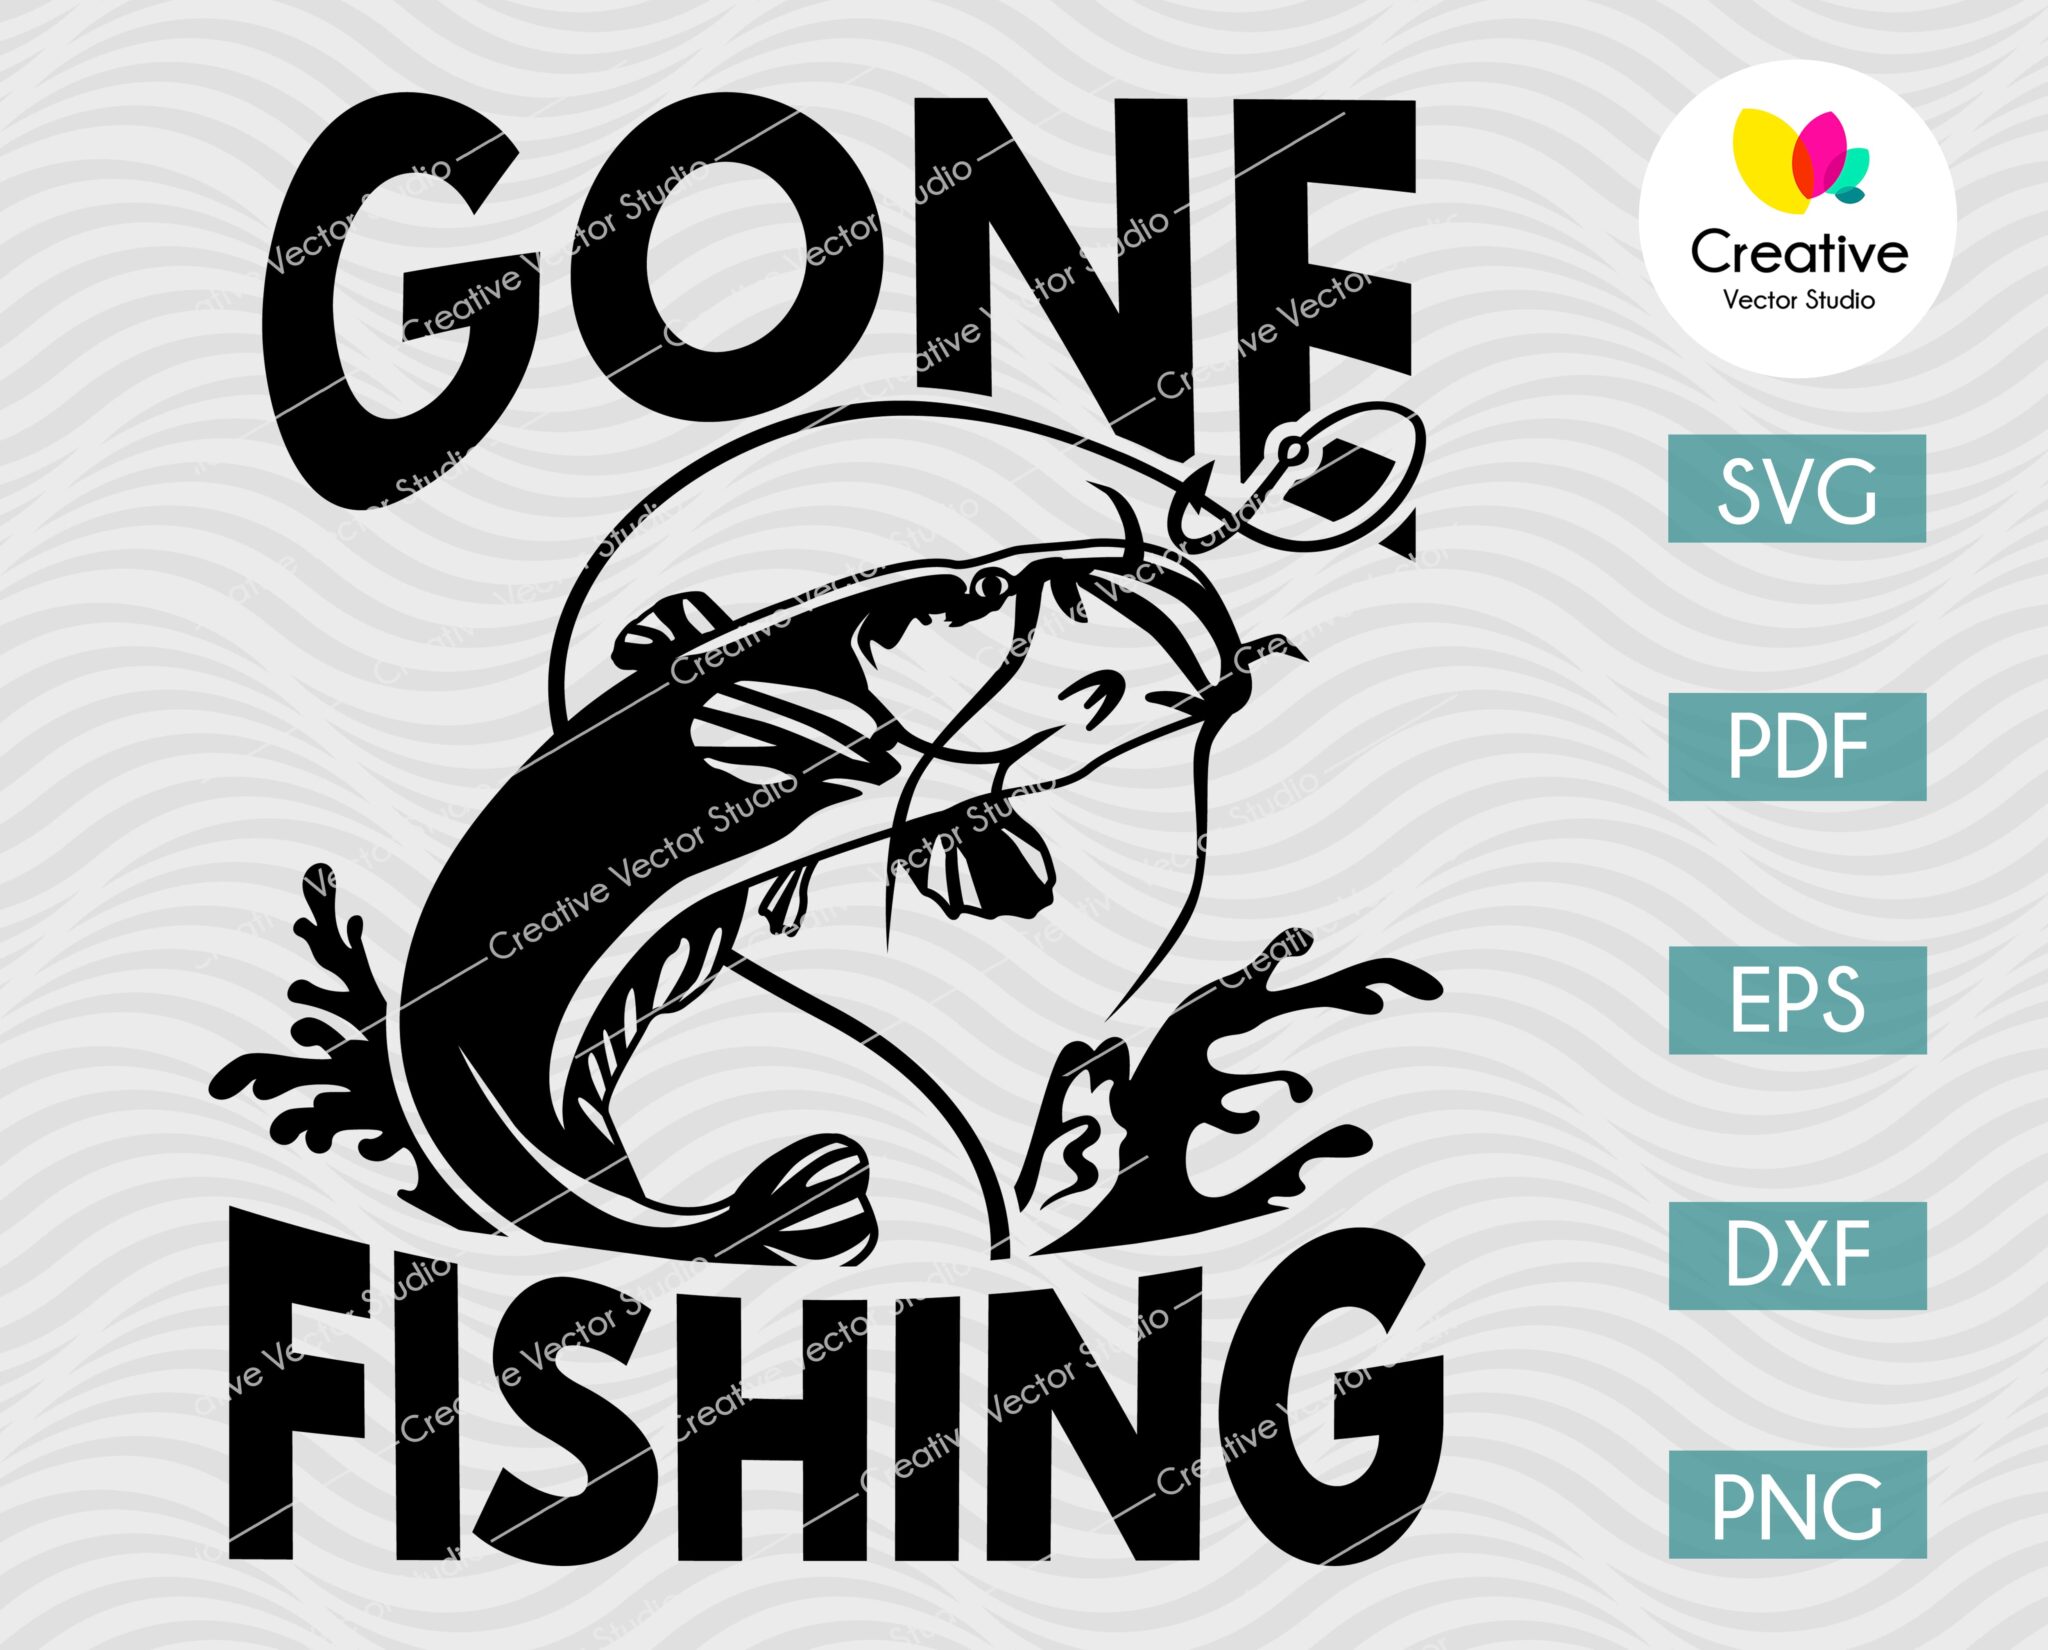 Gone Fishing Catfish SVG, PNG, DXF Cut File | Creative Vector Studio